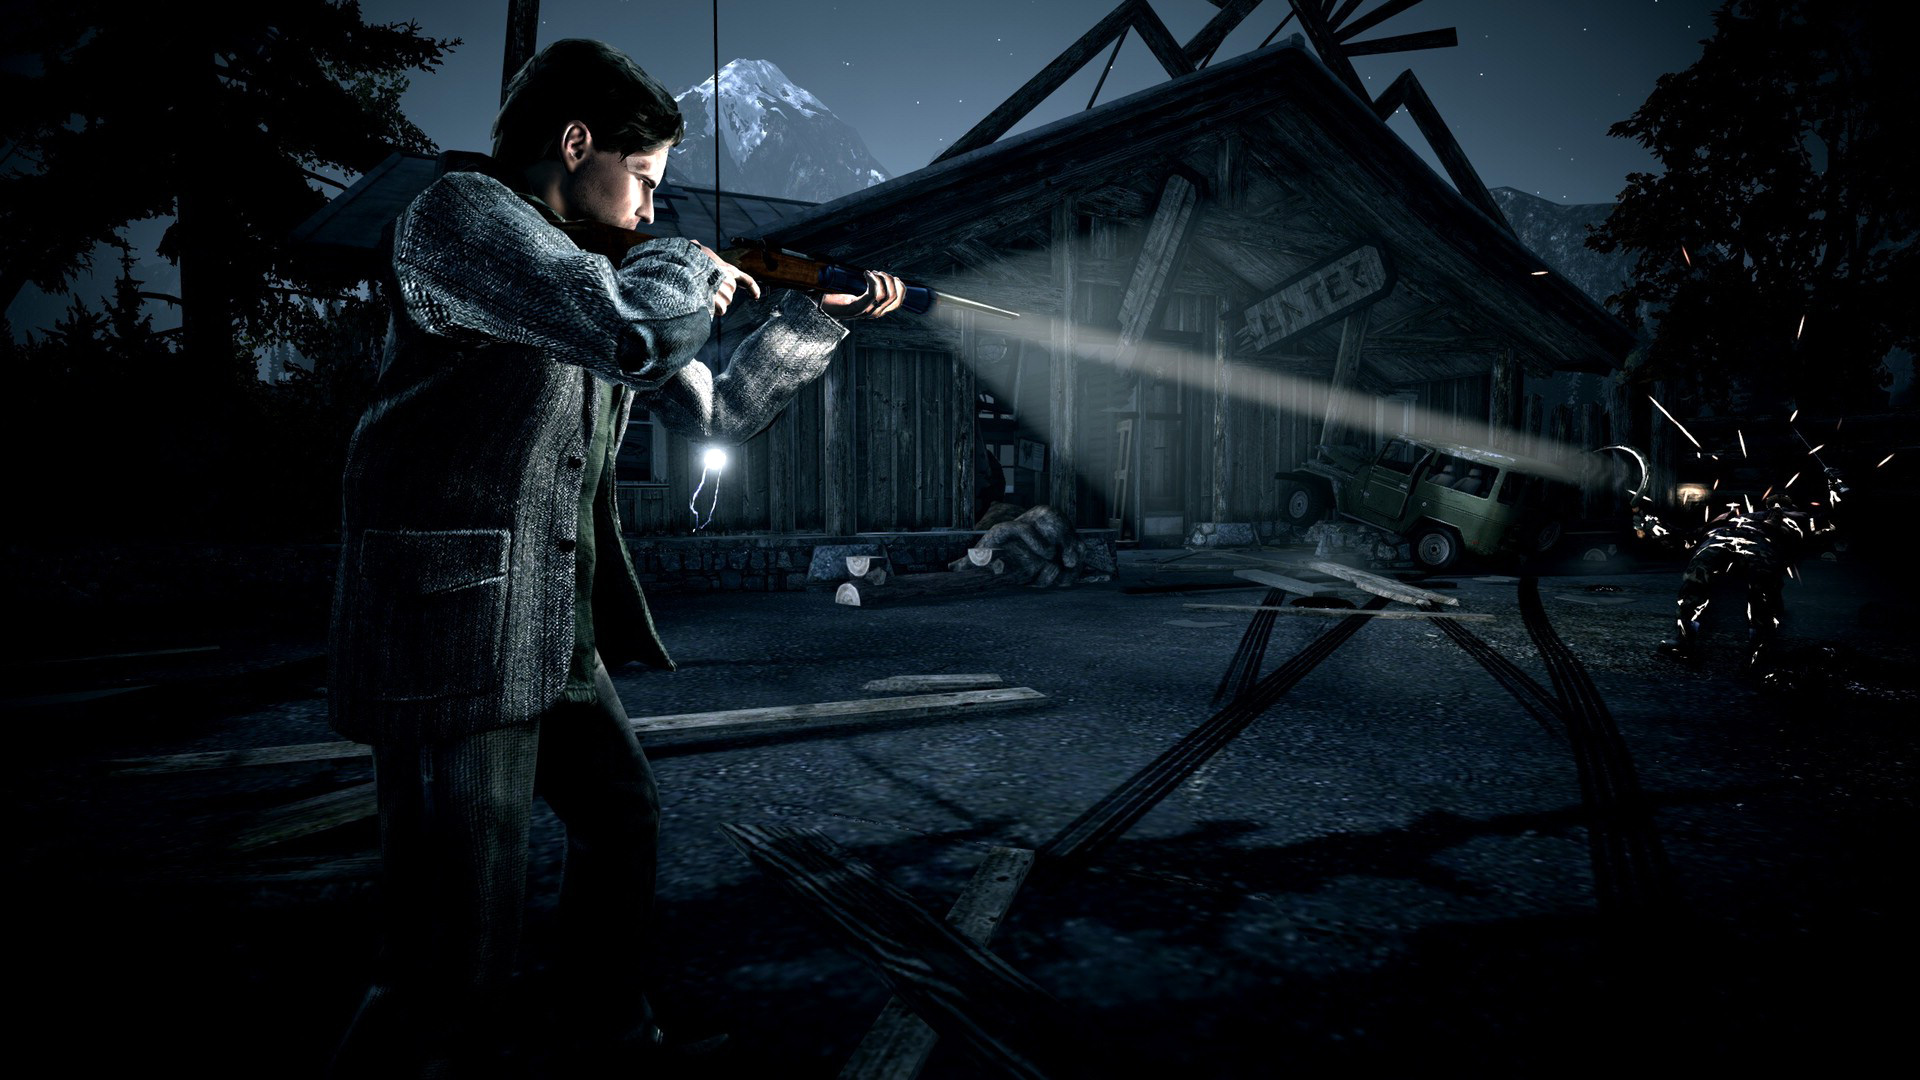 Listings designate an ‘Alan Wake’ remaster is coming to PS5 and Xbox Collection X in October